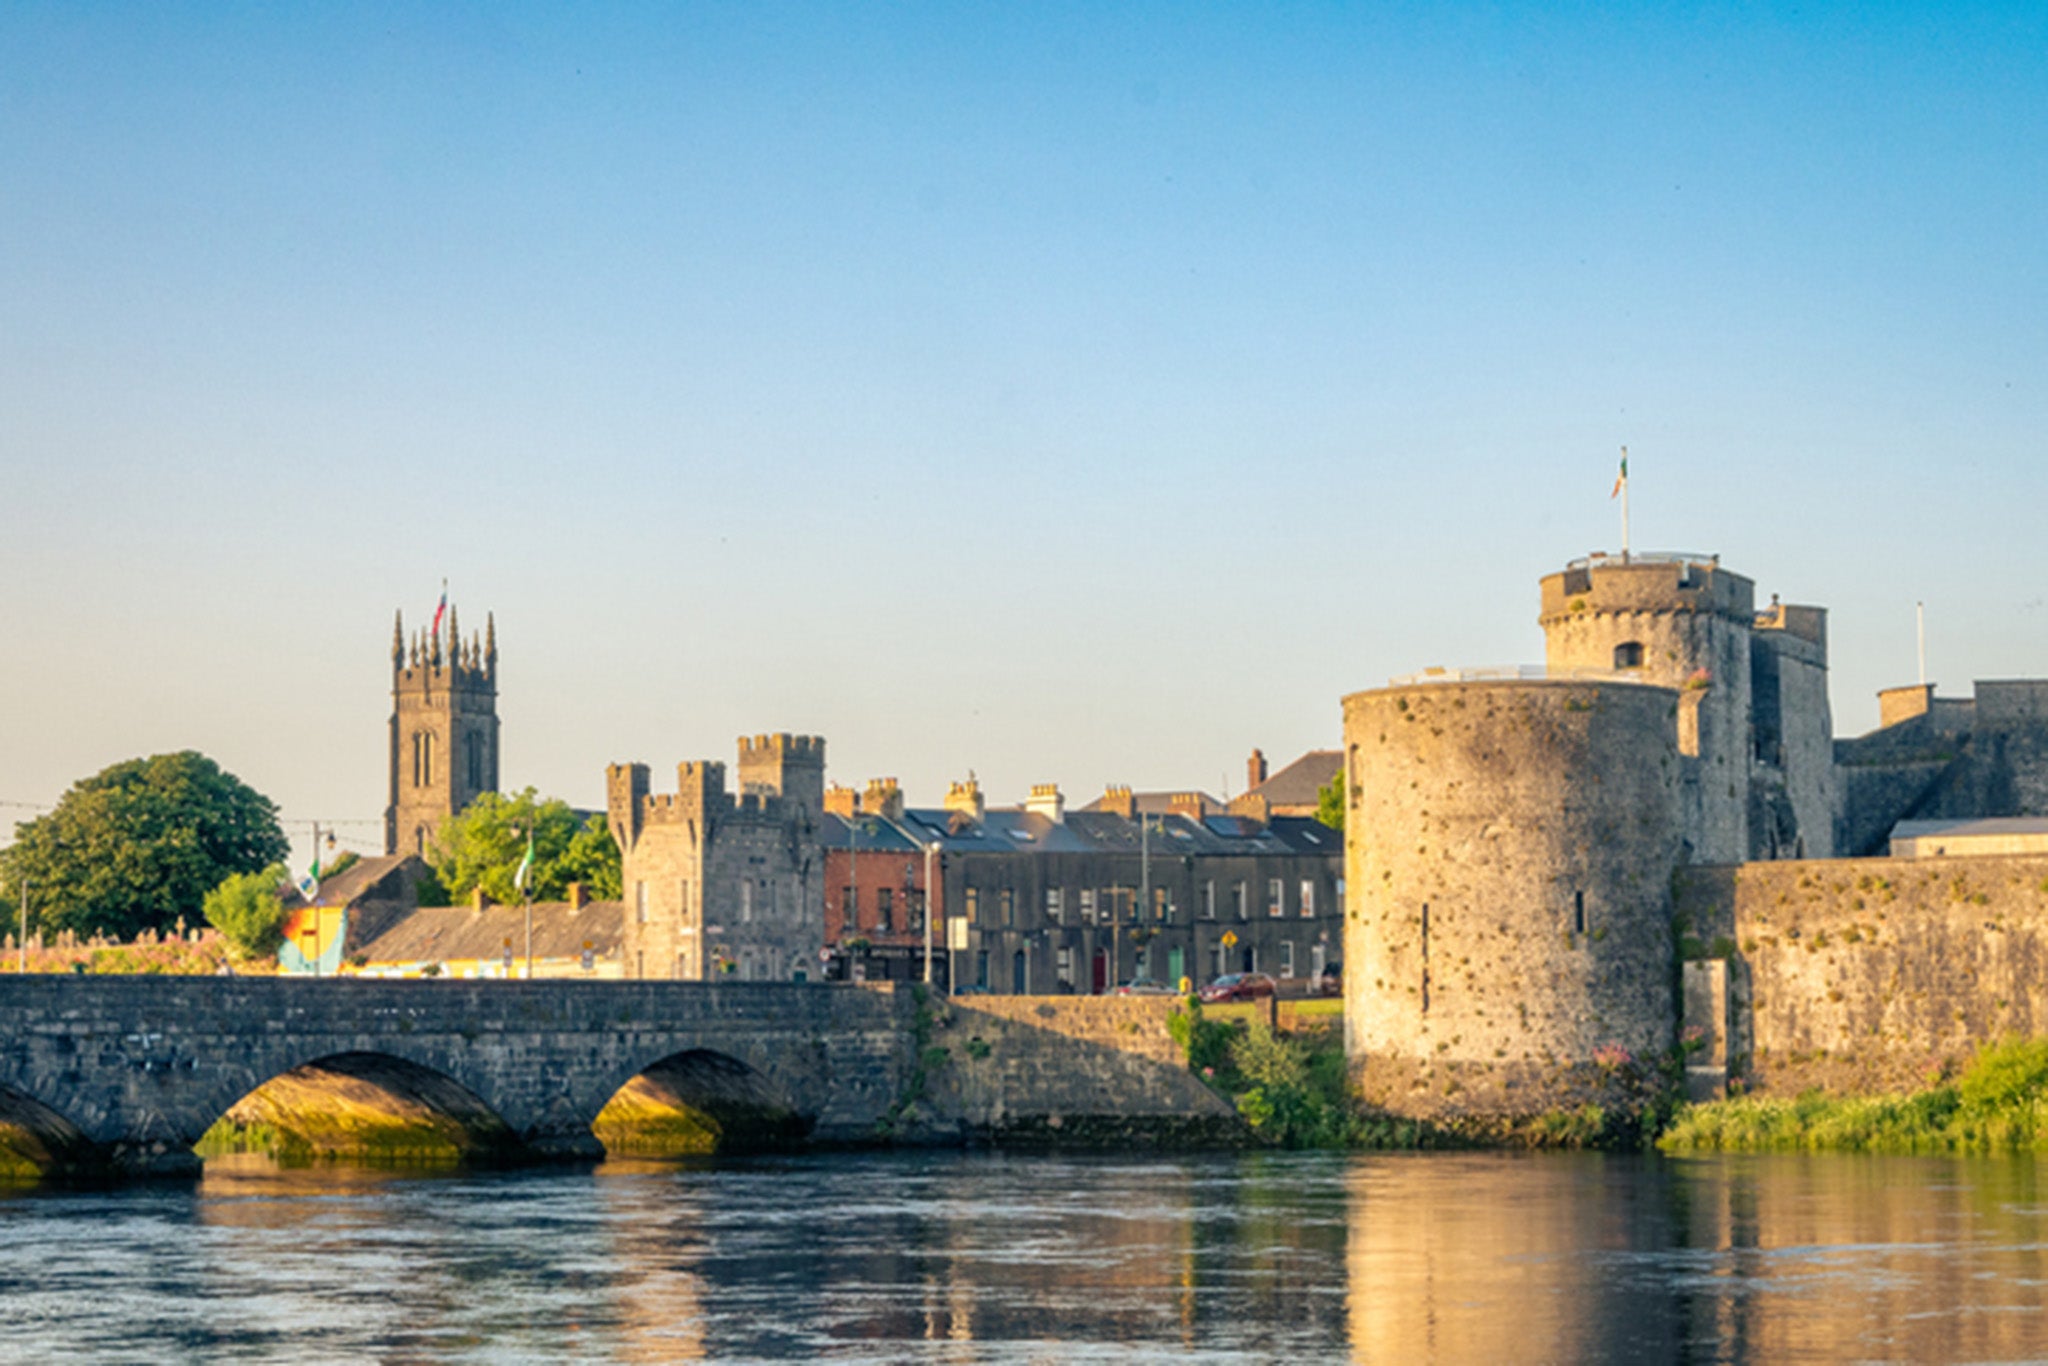 King John’s Castle has become a symbol of Limerick